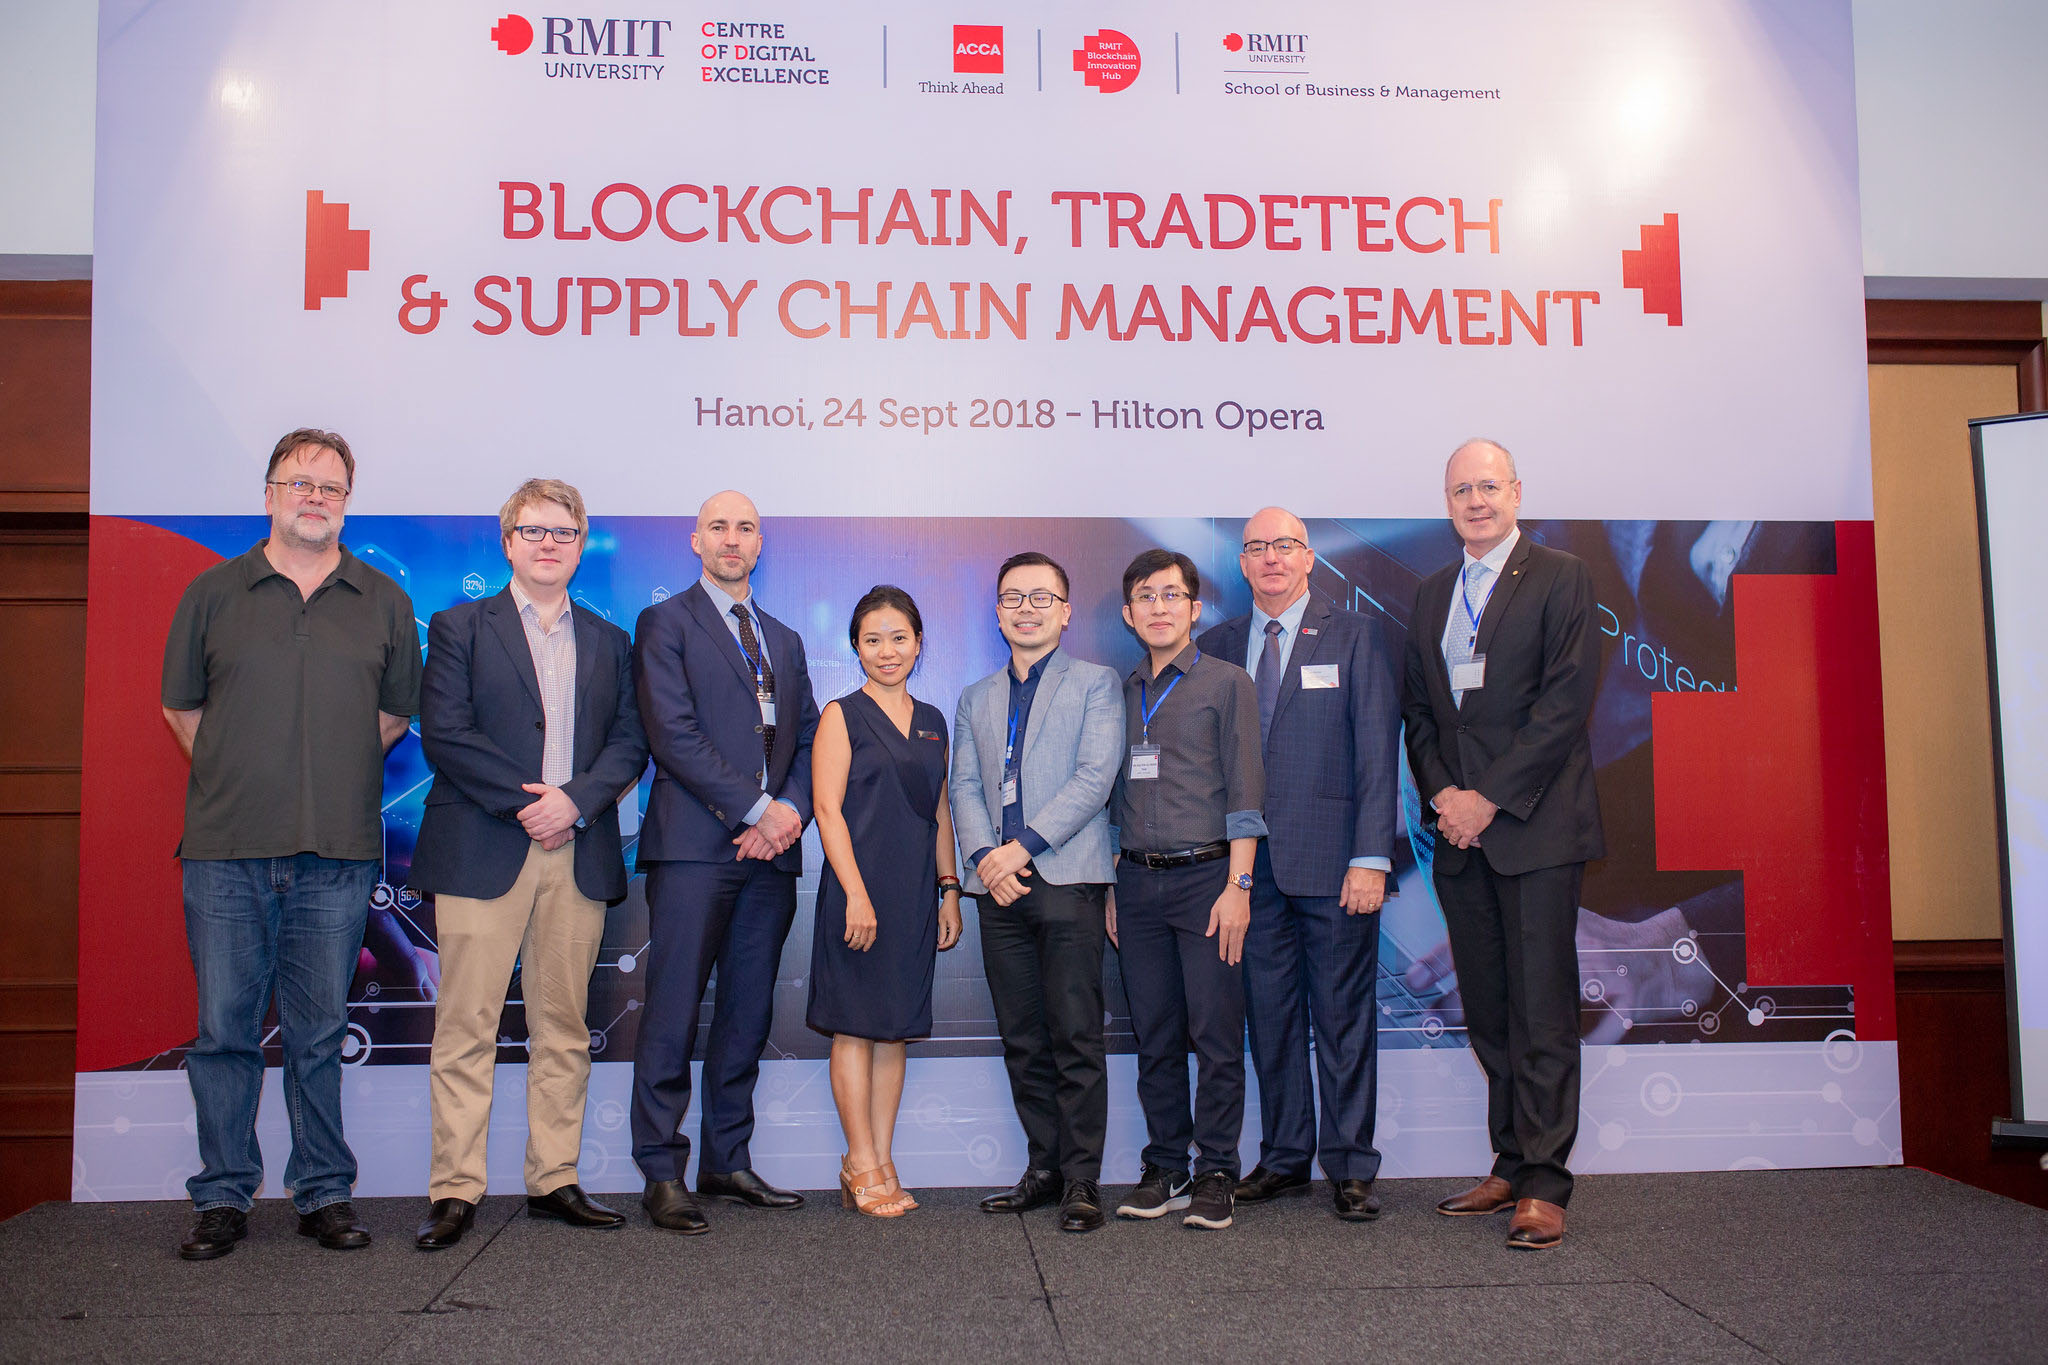 BIH Senior Research Fellow Dr Christopher Berg (pictured 2nd from left), BIH director Professor Jason Potts (pictured 3rd from left), CODE Senior Coordinator Yen Huynh (pictured 4th from left), Dr Binh Nguyen (pictured 4th from right) and Dr Thai Nguyen (pictured 3rd from right) at the event, Blockchain, Tradetech & Supply Chain Management held in Hanoi last year.